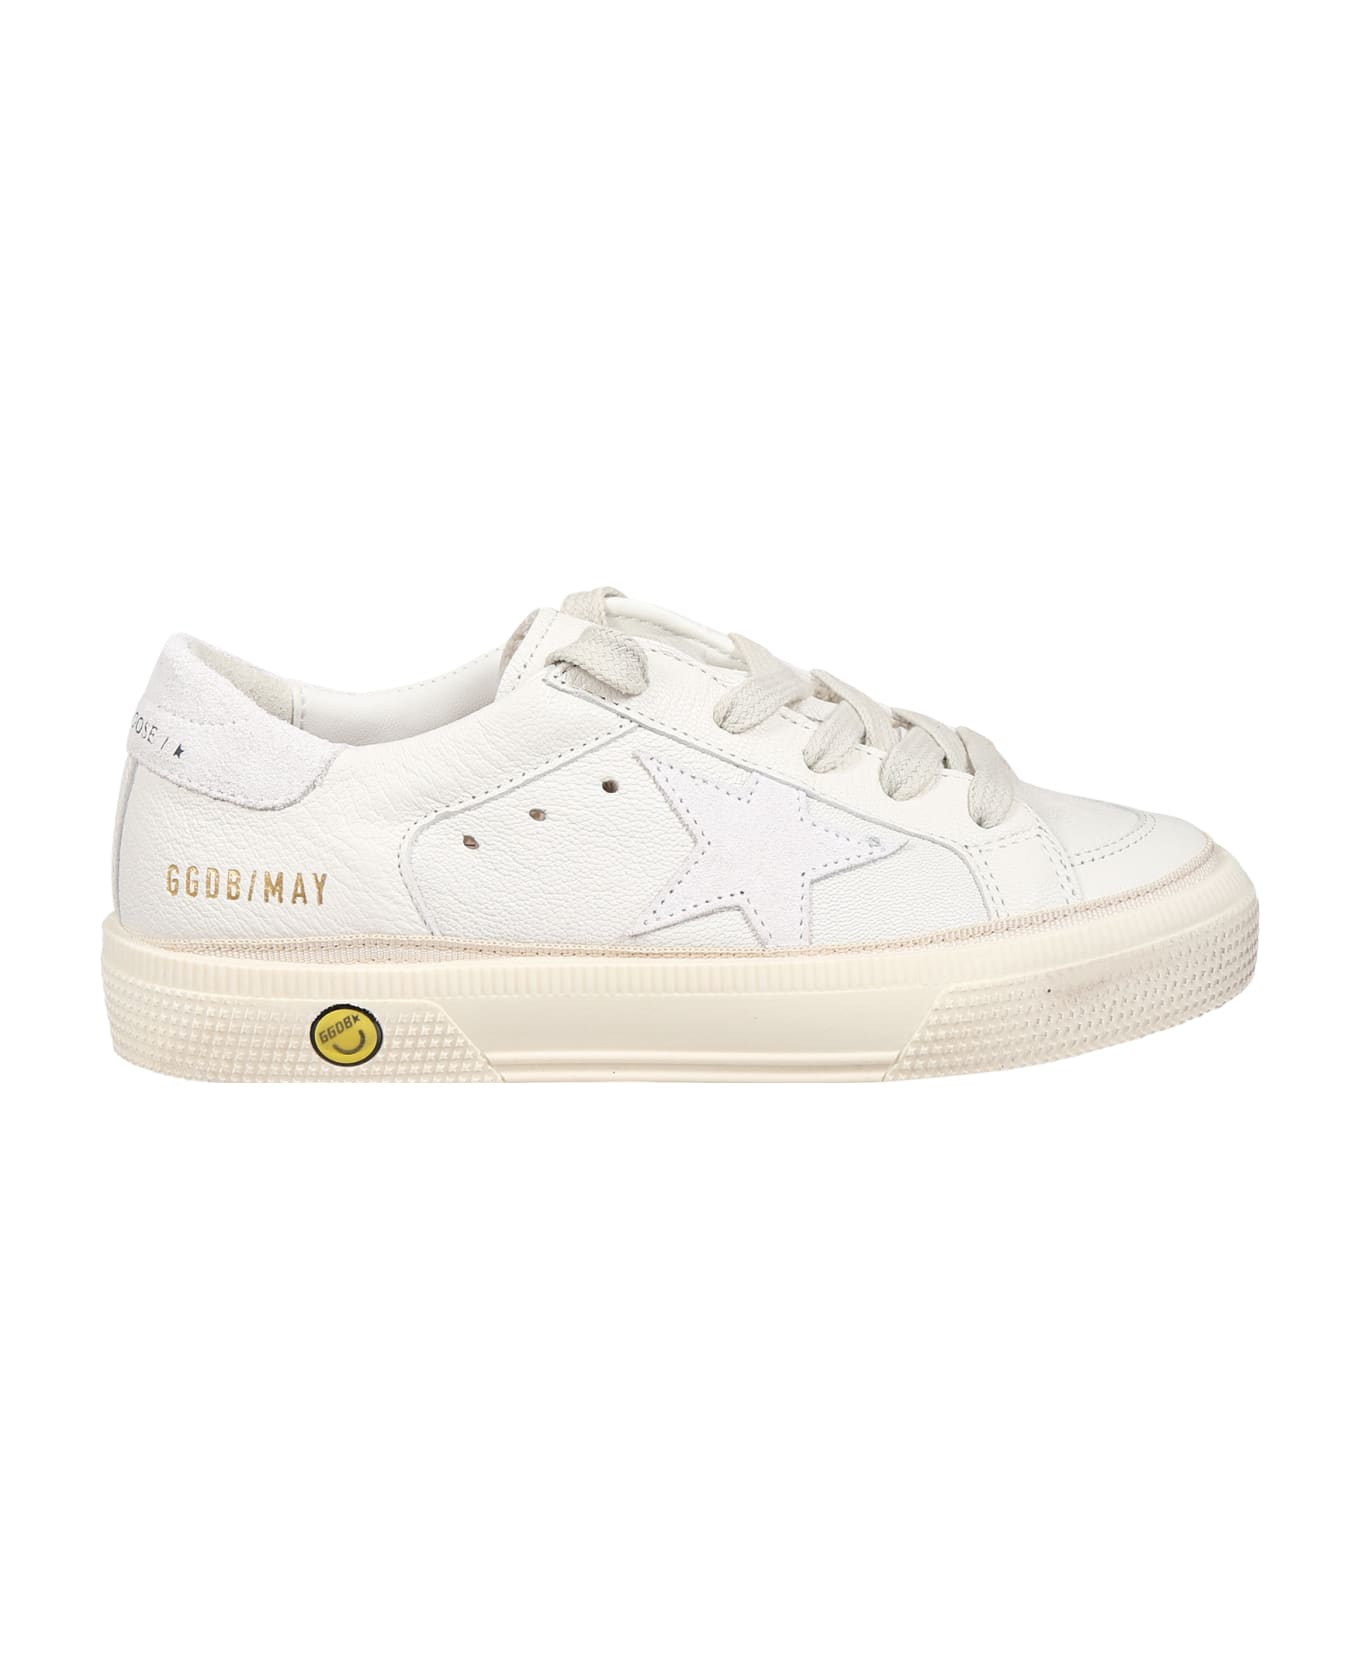 Golden Goose White May Sneakers For Girl With Iconic Star - White